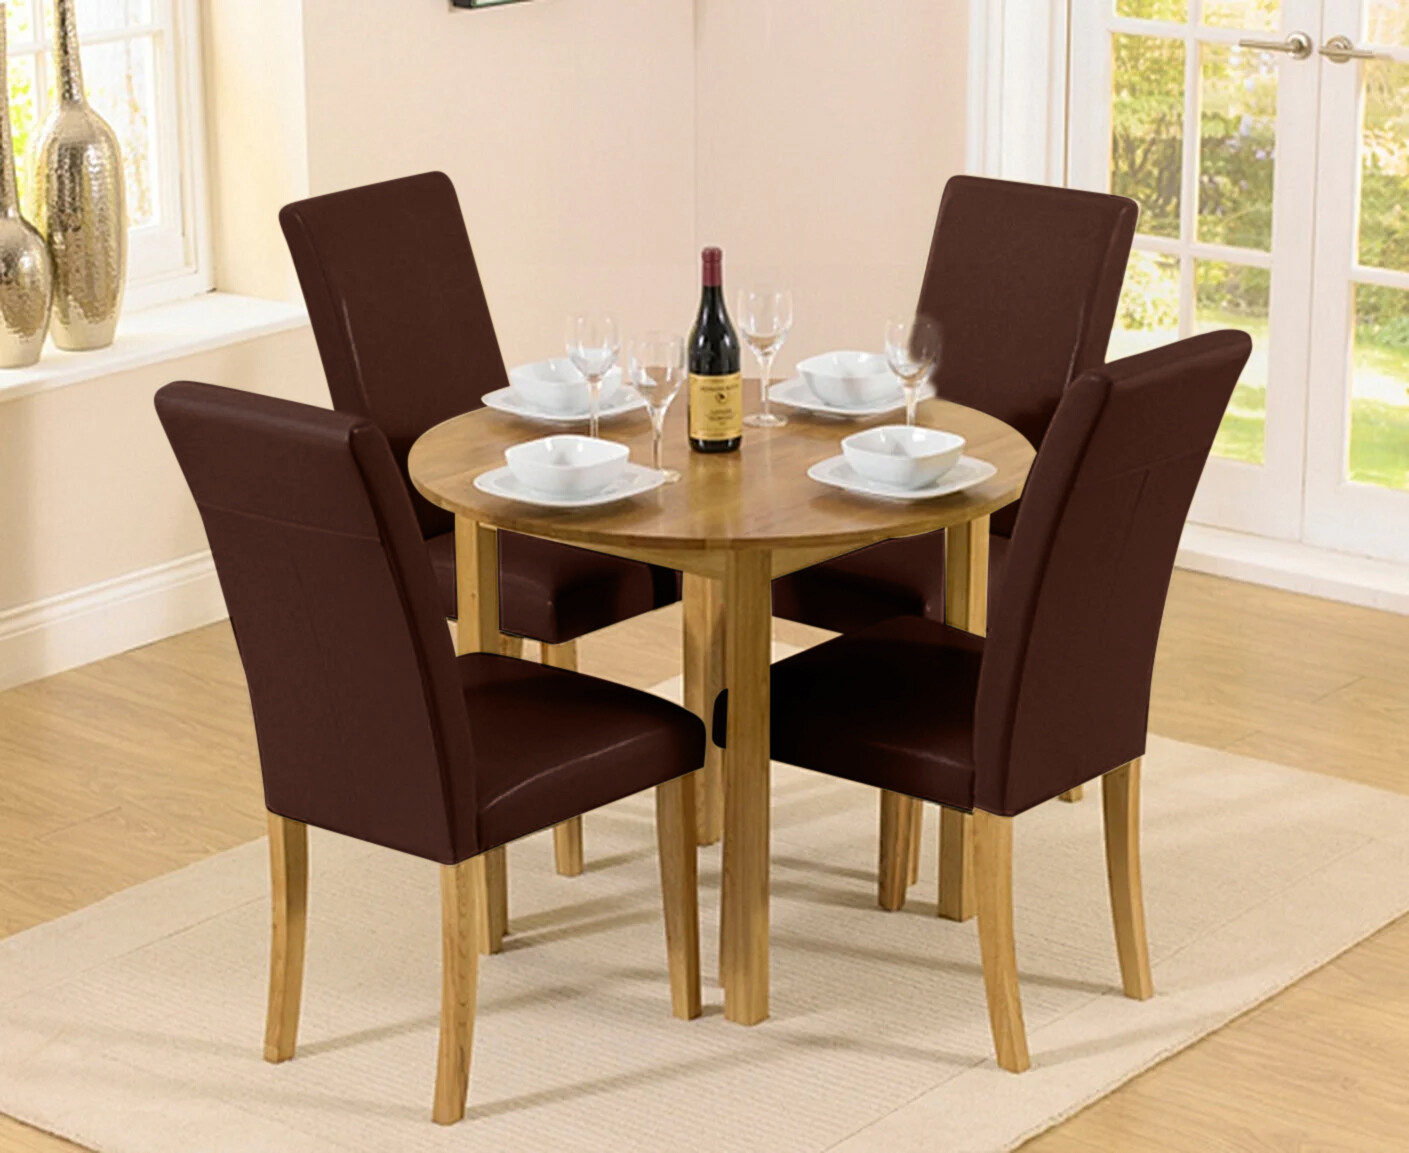 Extending York 90cm Solid Oak Drop Leaf Dining Table With 2 Brown Olivia Chairs